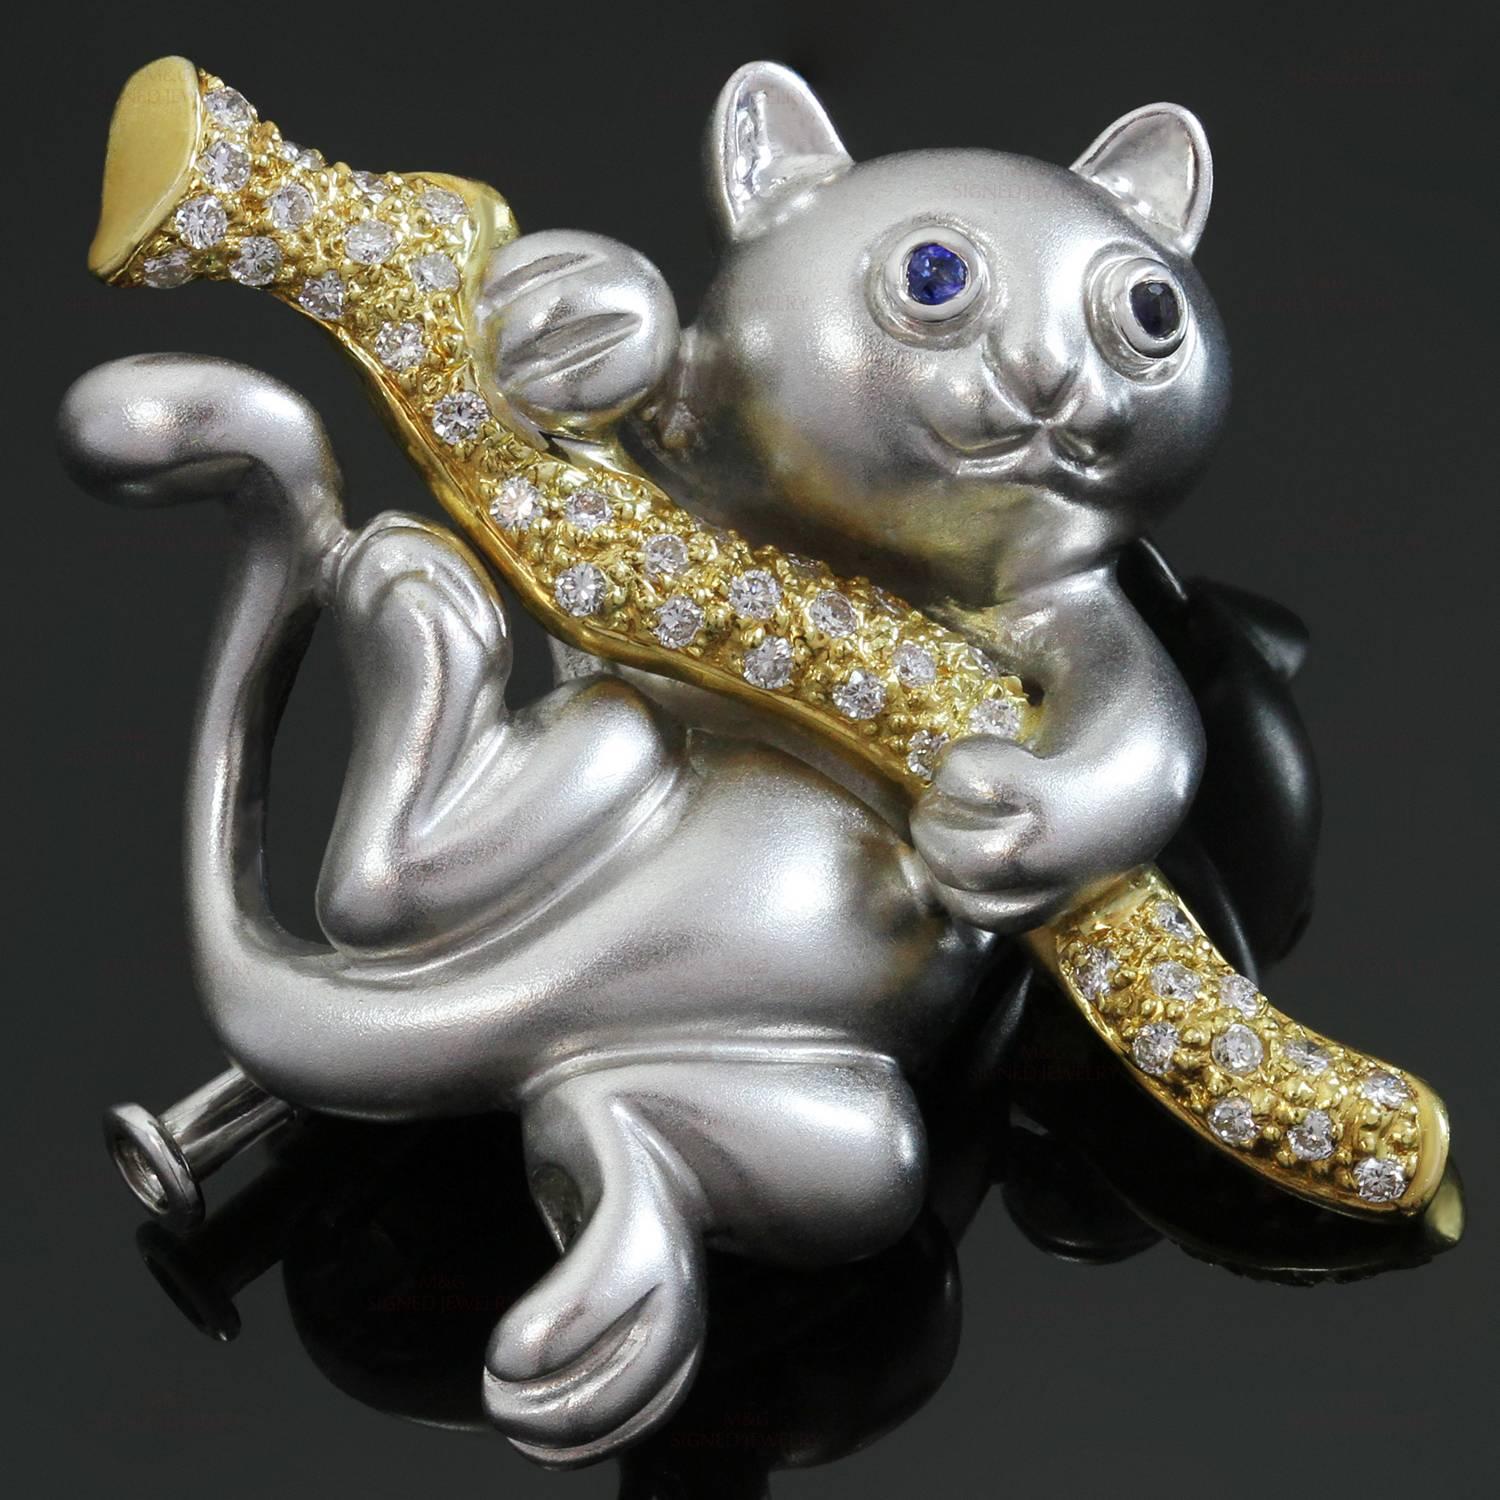 This stunning pendant brooch features a whimiscal cat with faceted blue sapphire eyes and an 18k matte white gold body, suspended from an 18k yellow gold branch set with brilliant-cut round diamonds of an estimated 0.33 carats. Made in United States